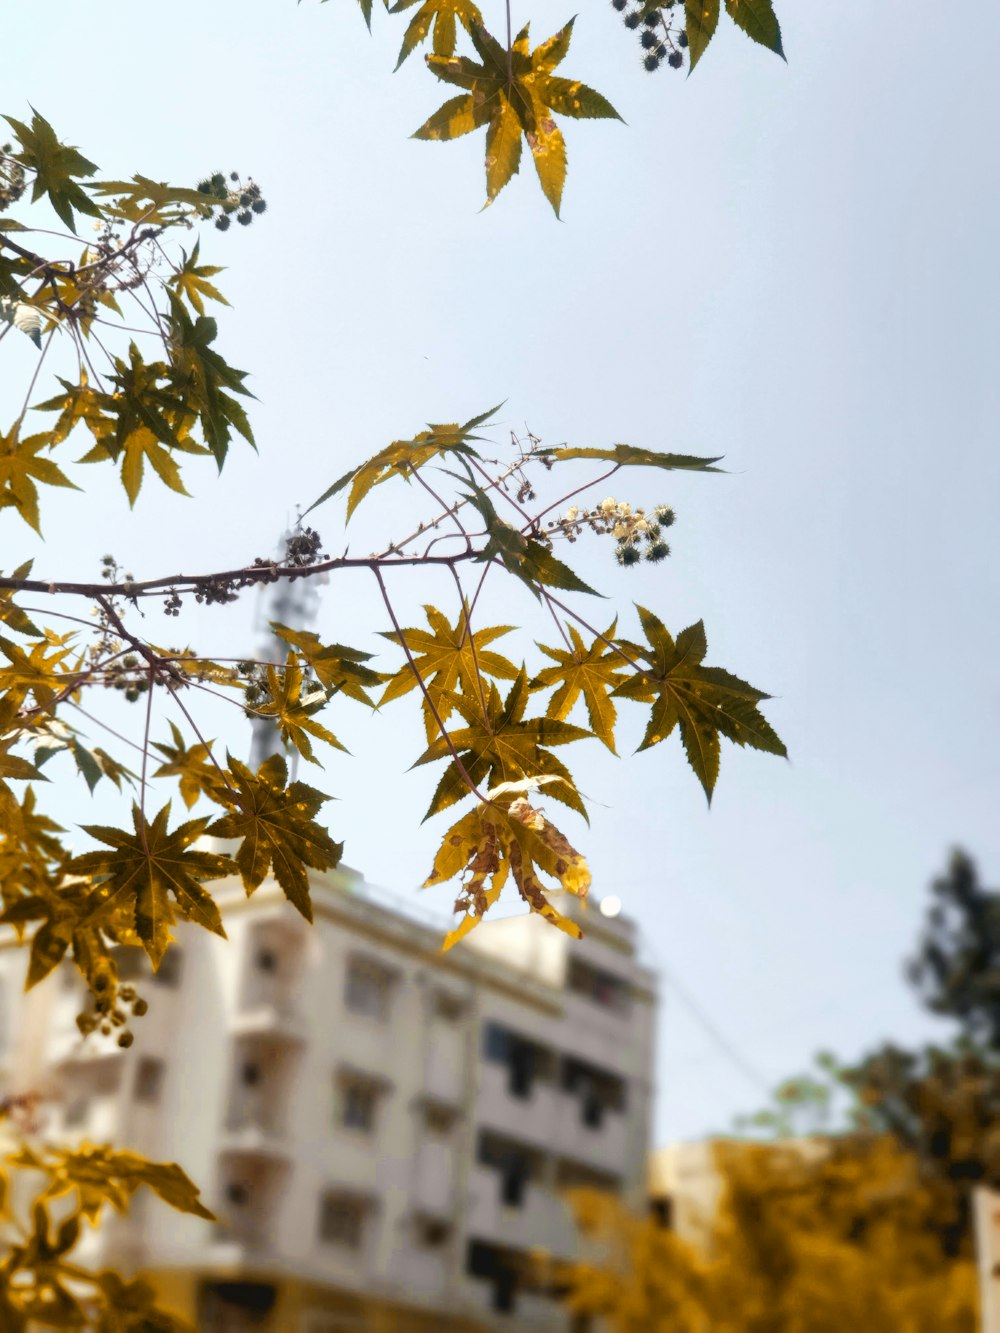 the leaves of a tree in front of a building